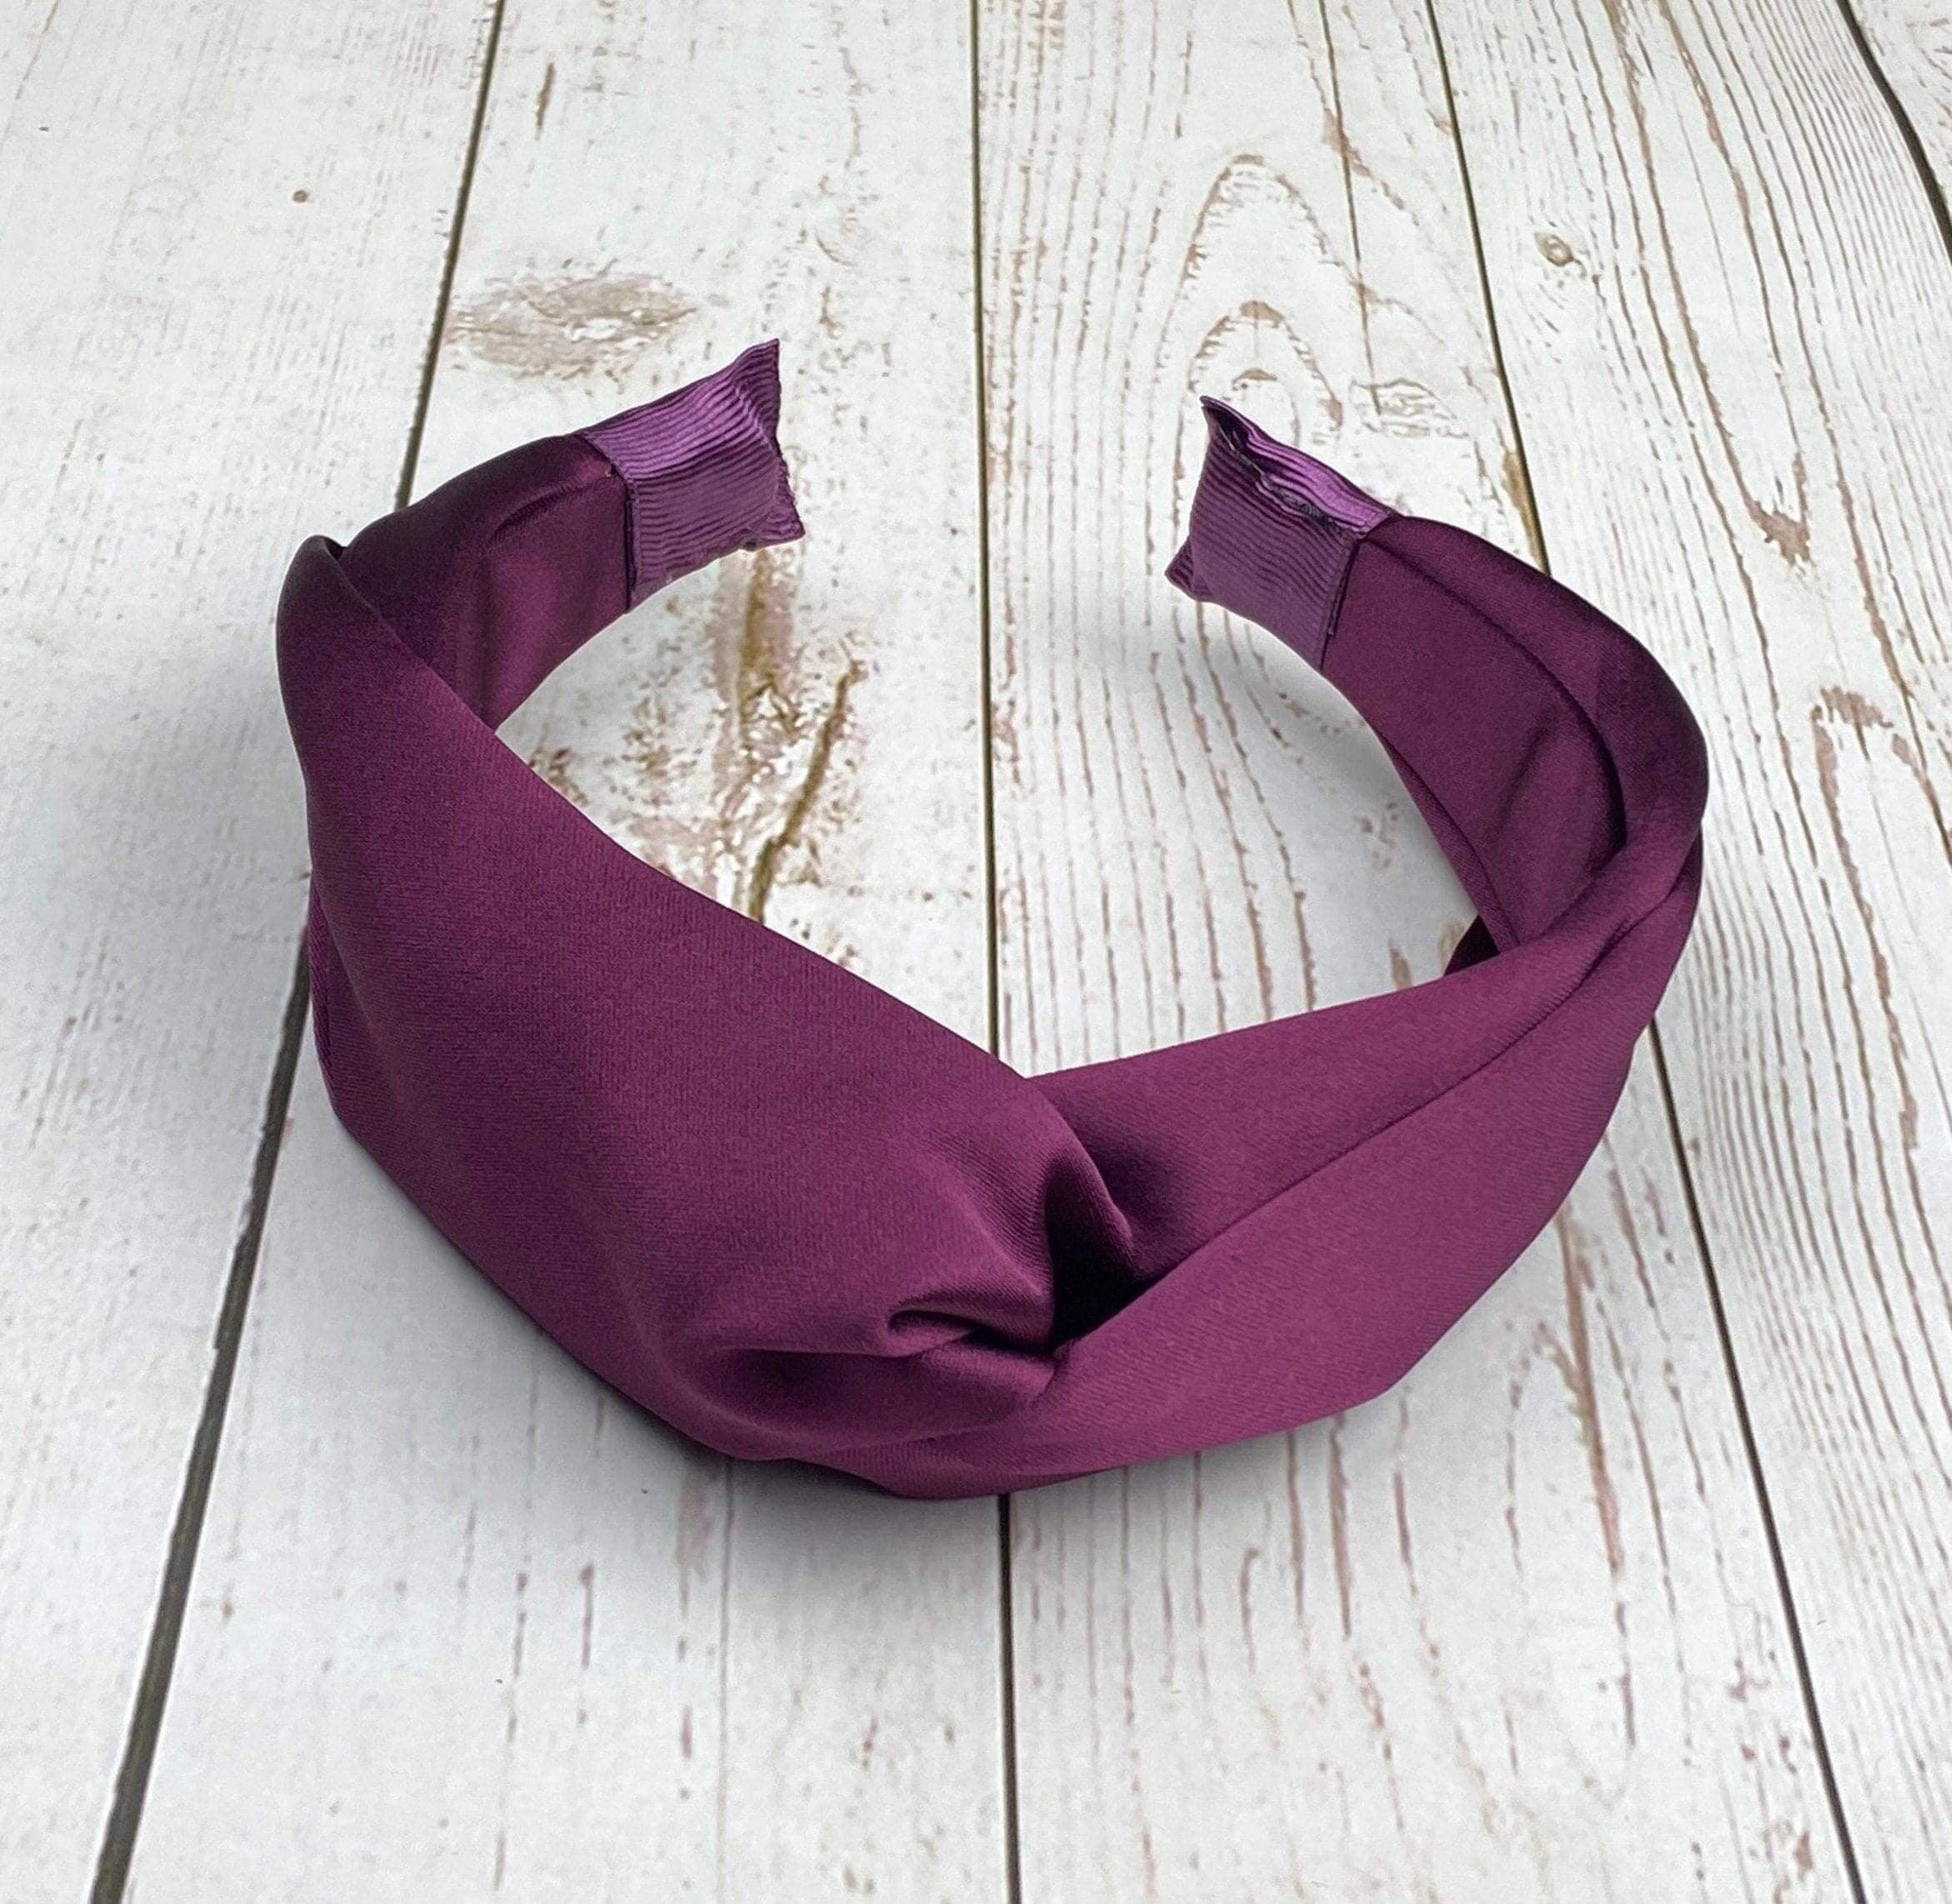 Stylish Maroon Satin Knotted Headband for Women - Classic Fashion Hairband in Dark Cherry Color without Padding available at Moyoni Design